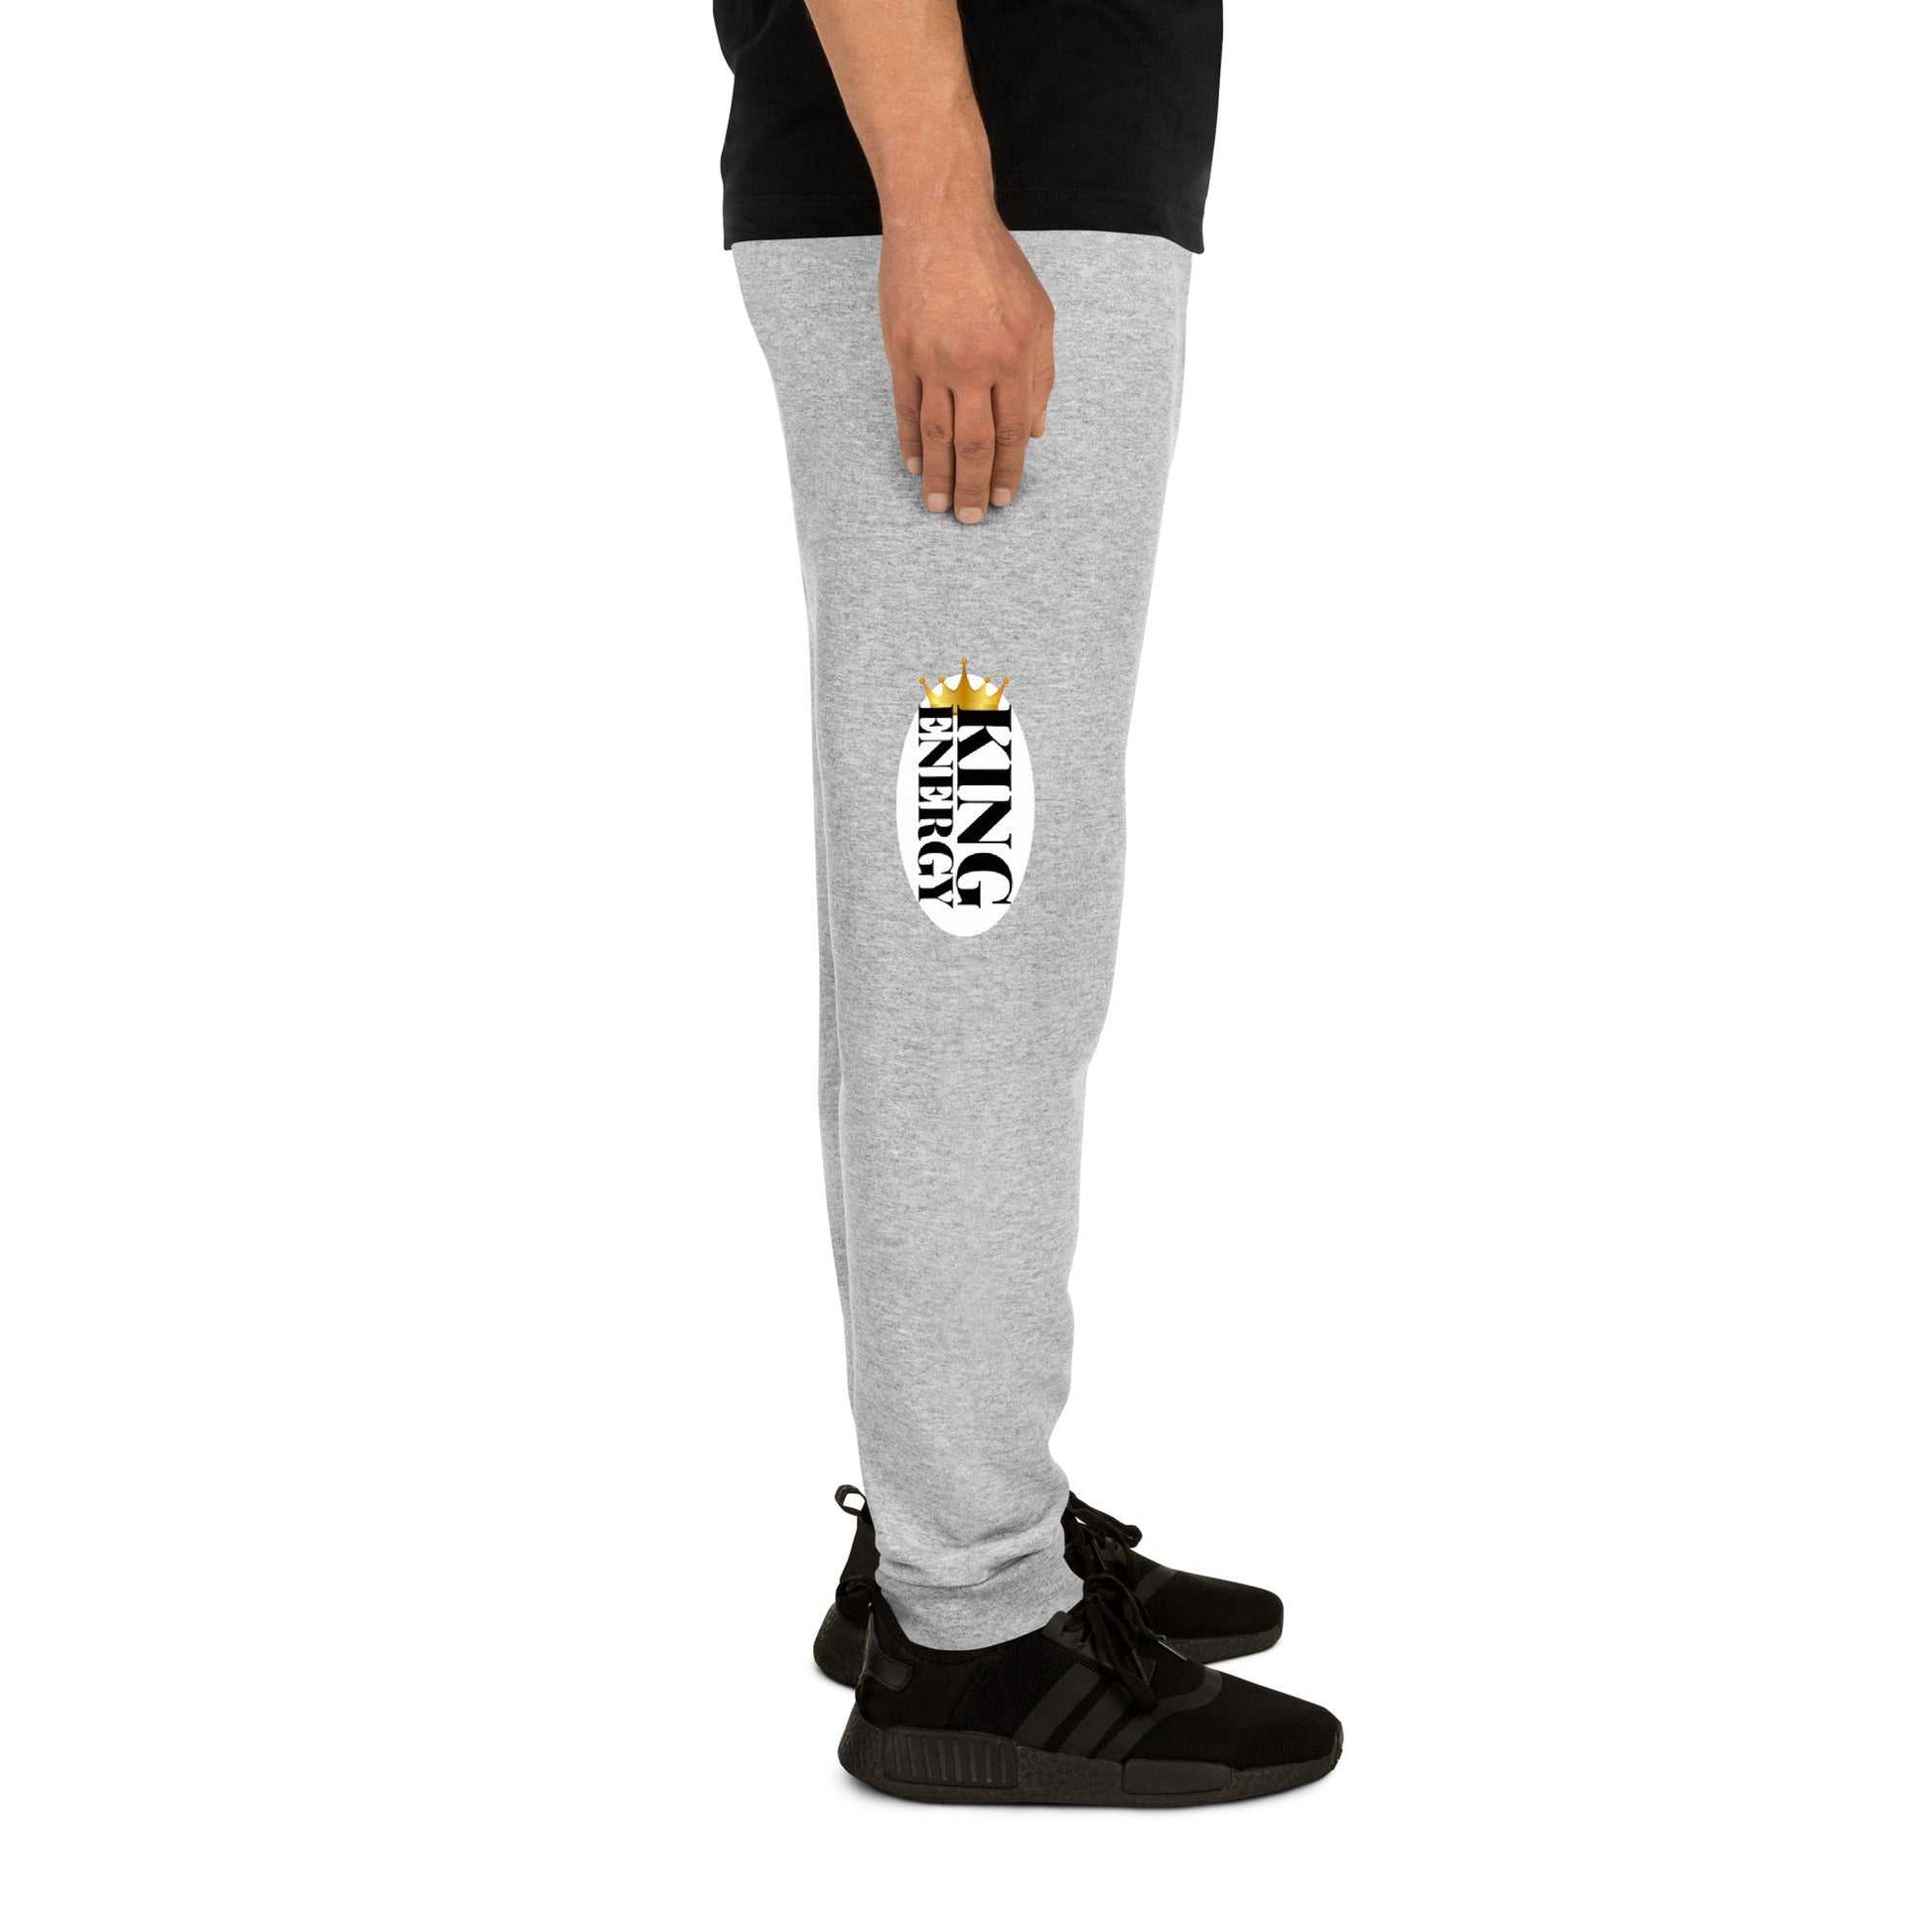 King Energy Unisex Joggers Long Sleeve T-shirts and Joggers Sweatpants Good Vibes Daily Lab 45